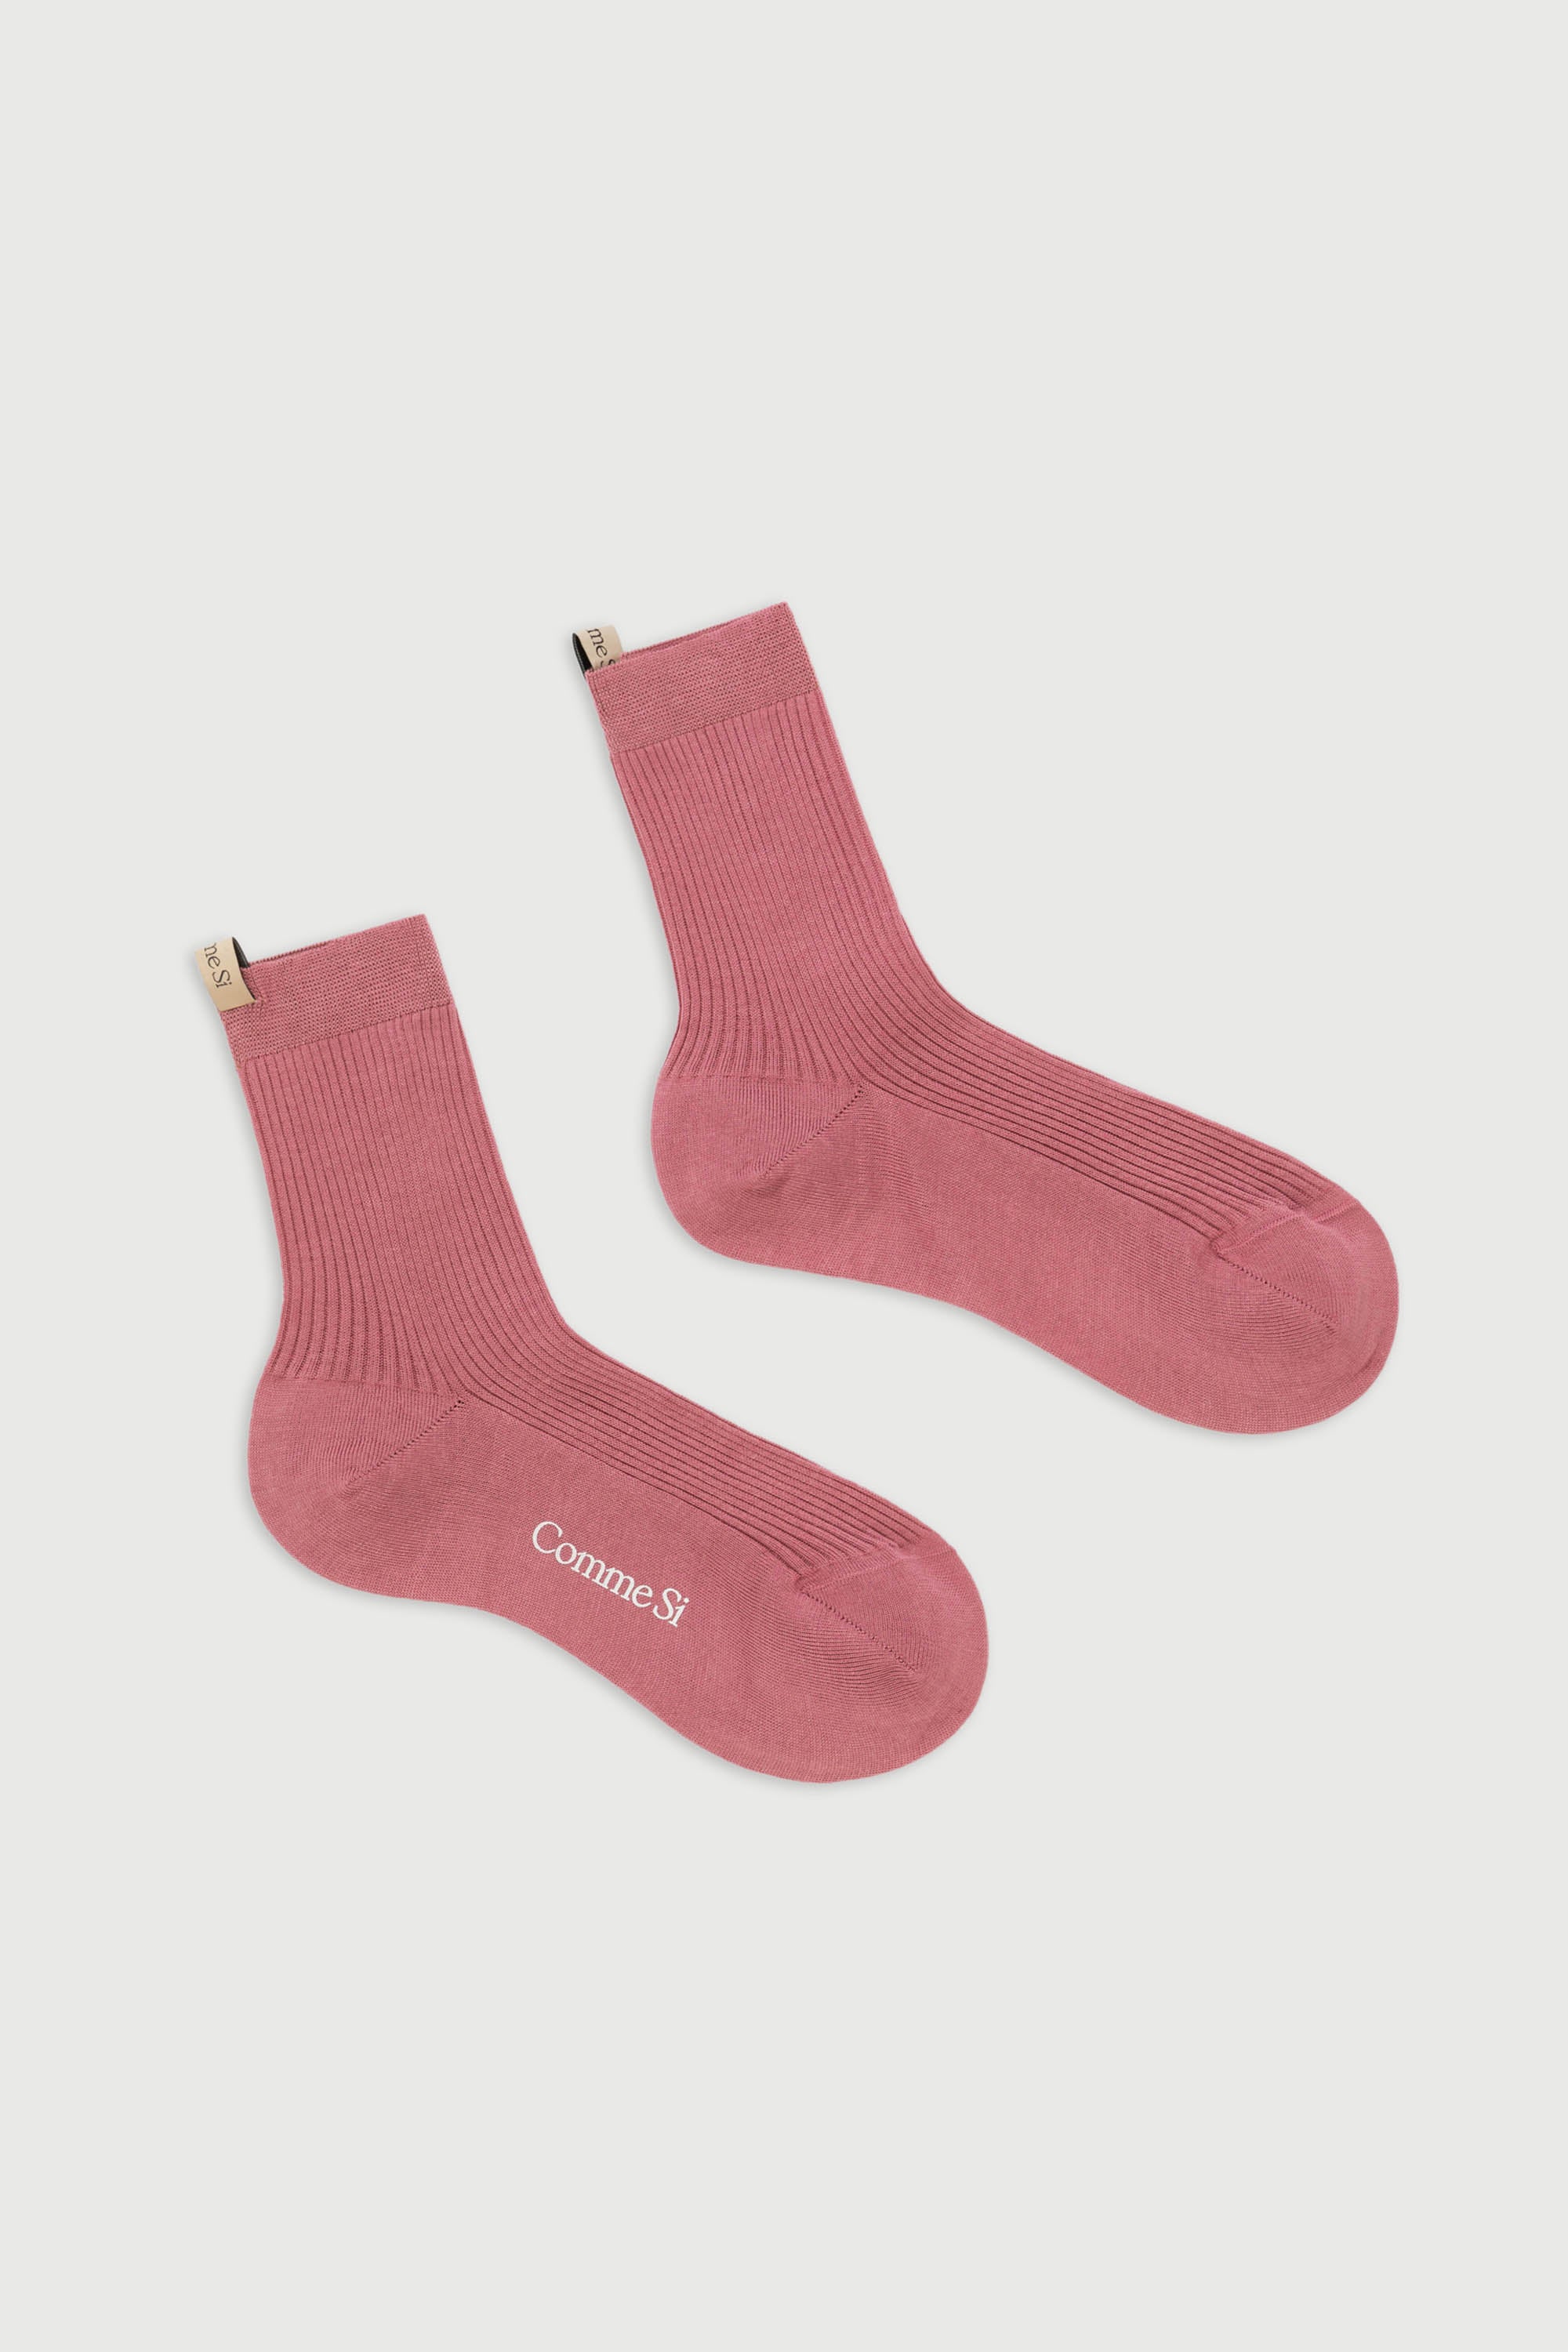 The Agnelli Sock in Rose, Egyptian Cotton